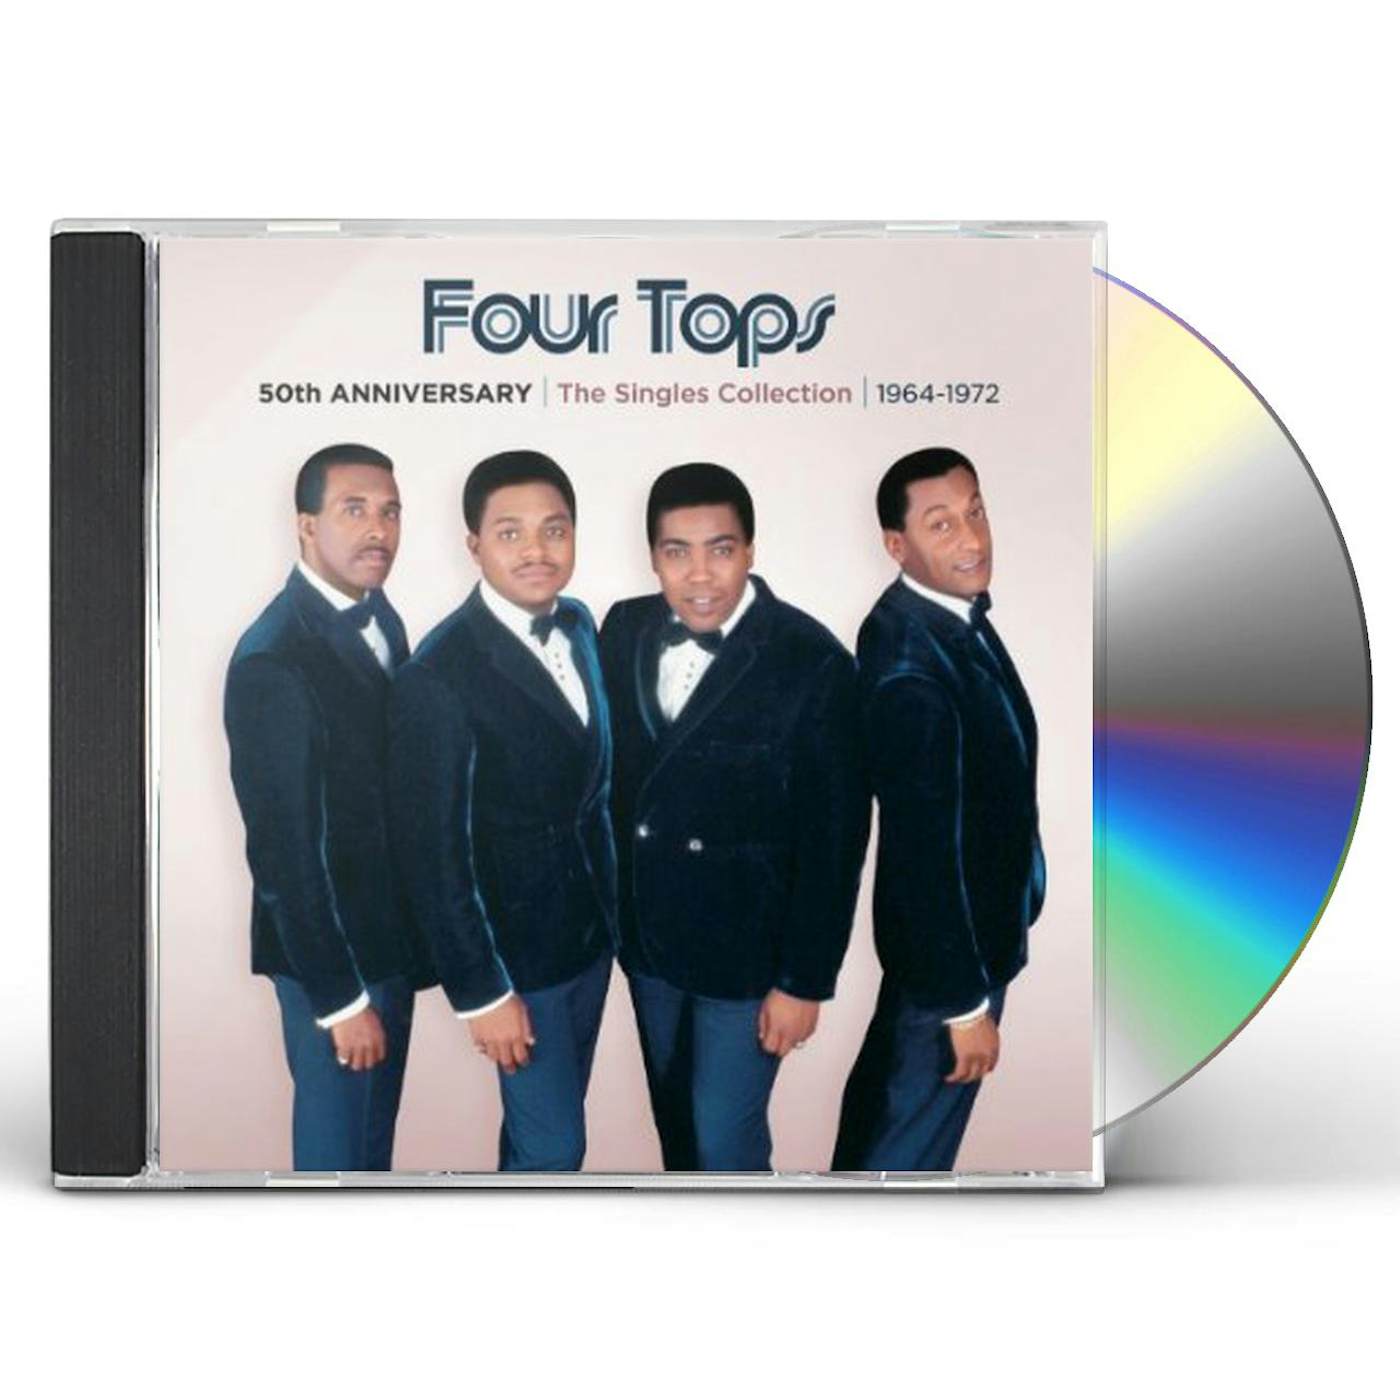 Four Tops 50TH ANNIVERSARY: SINGLES COLLECTION 1964-1972 CD